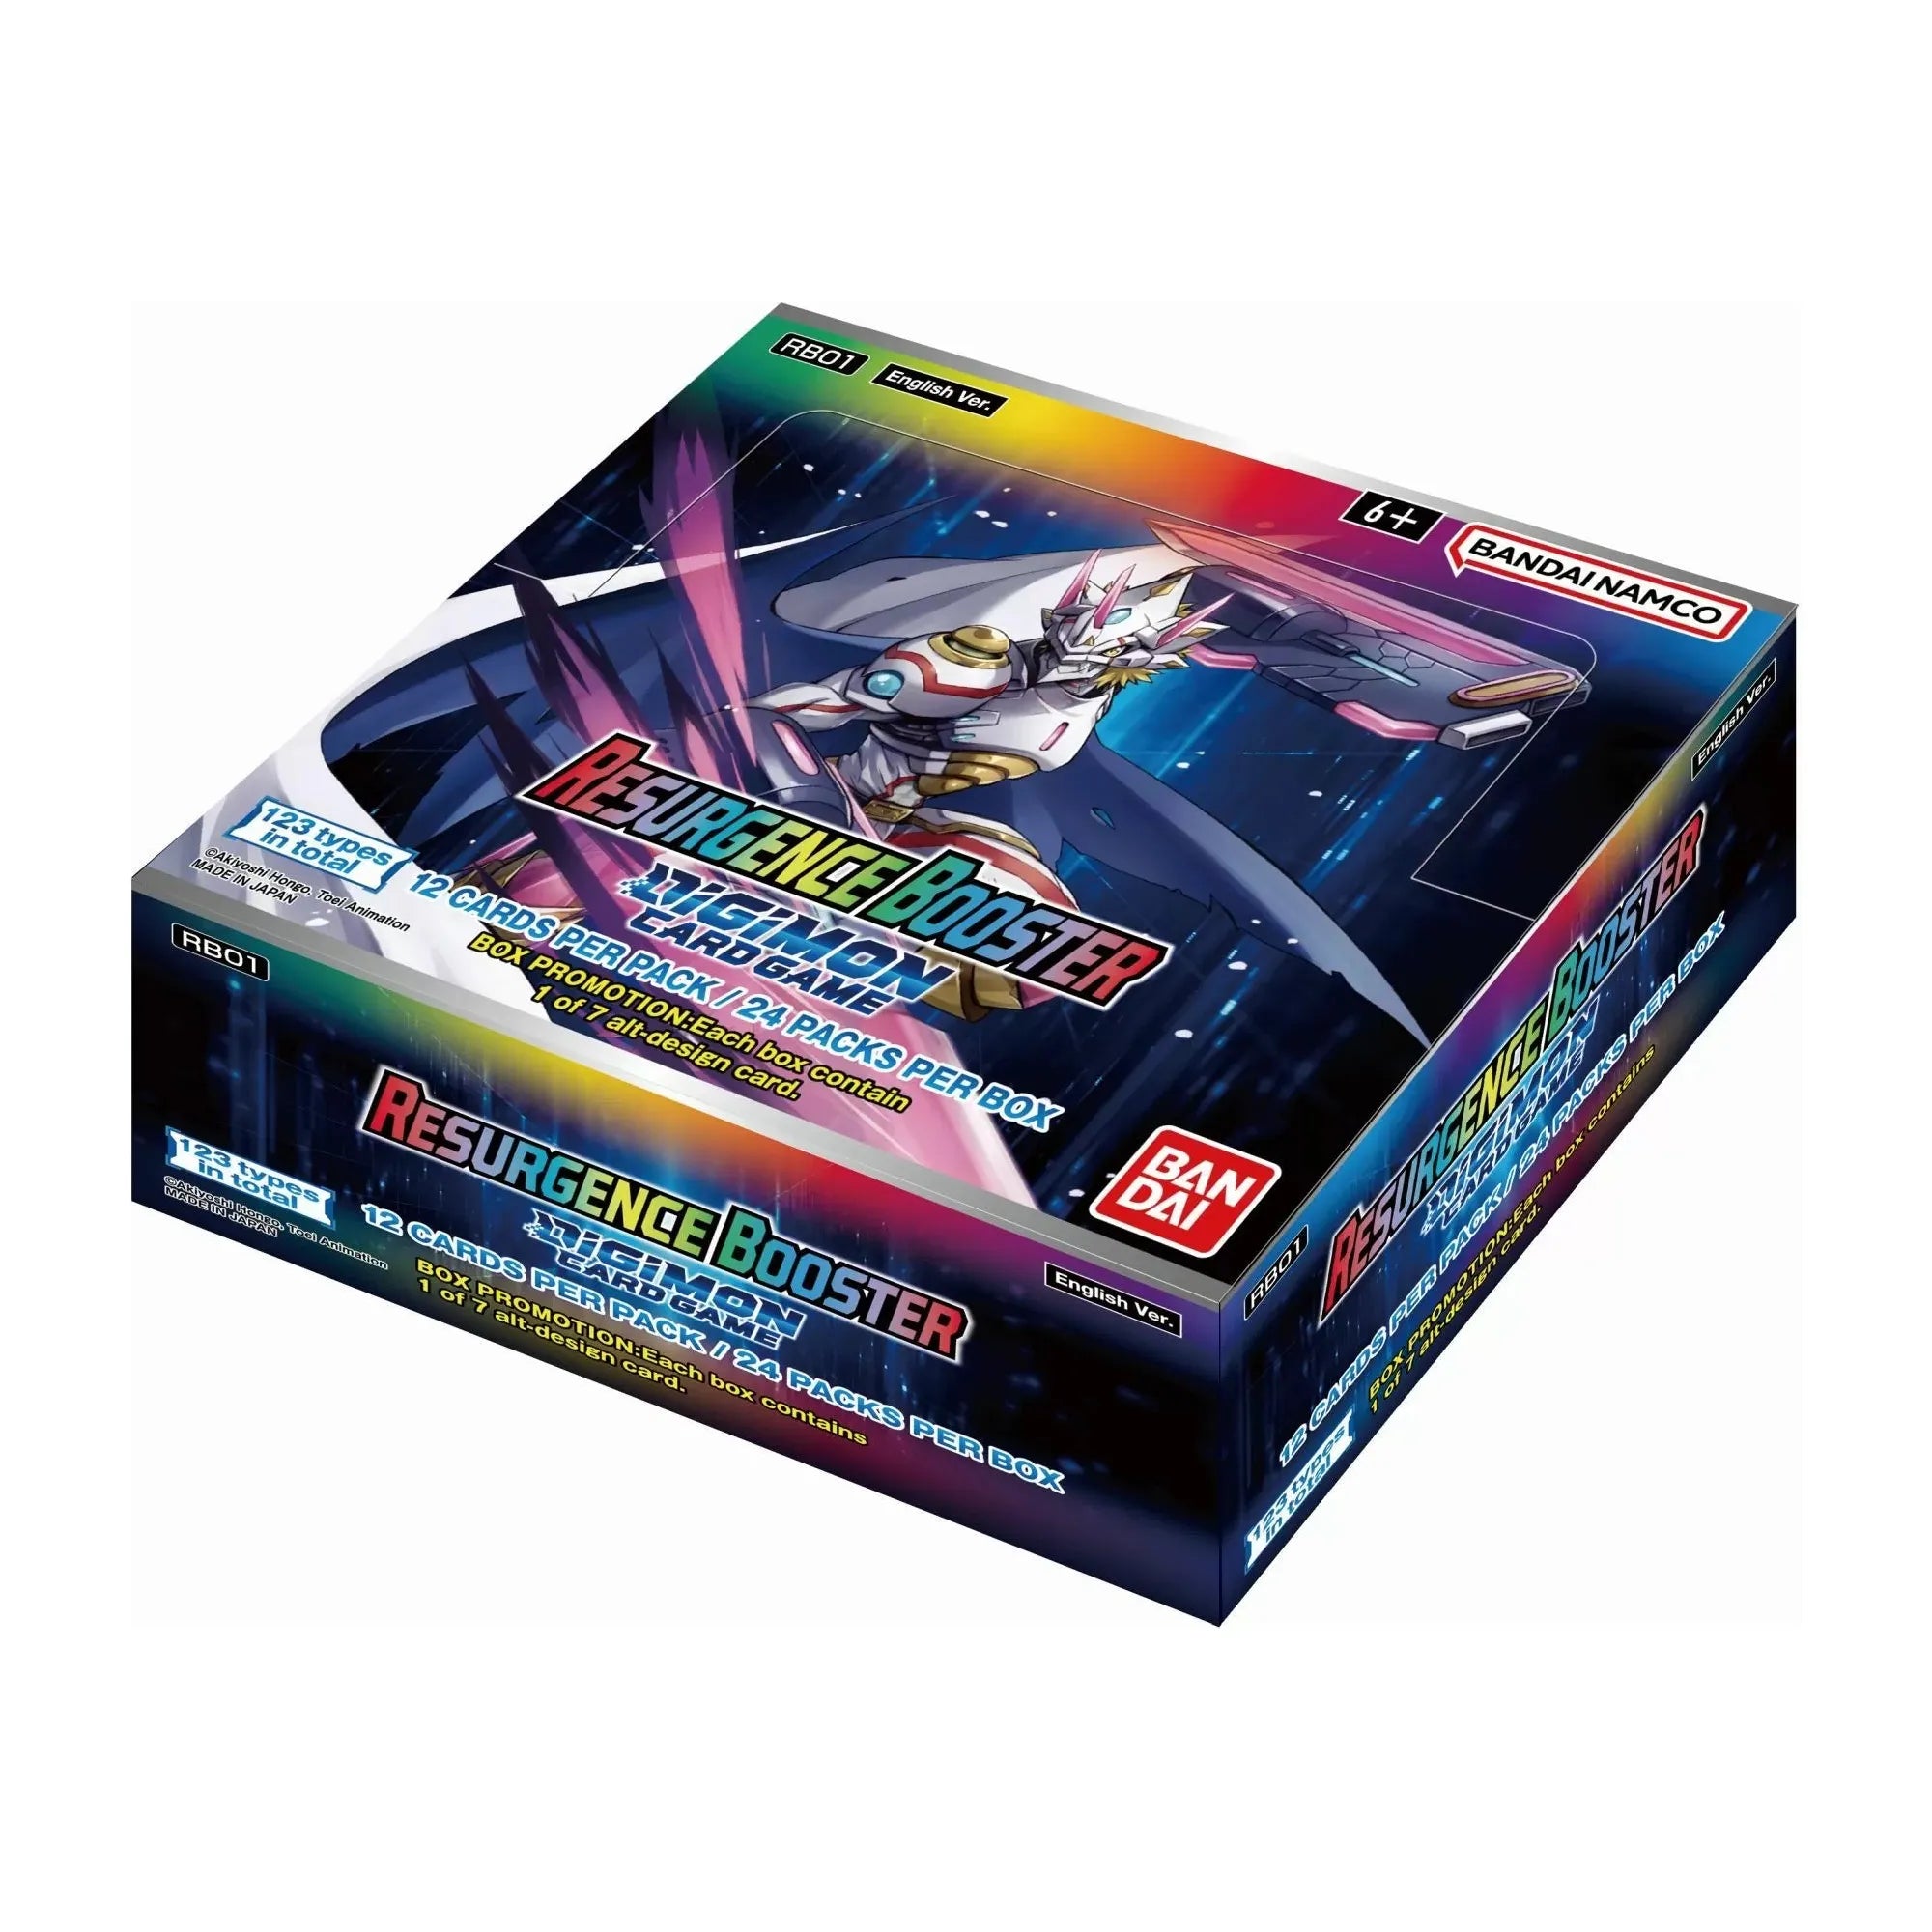 Digimon Card Game Resurgence (RB01) Booster Box